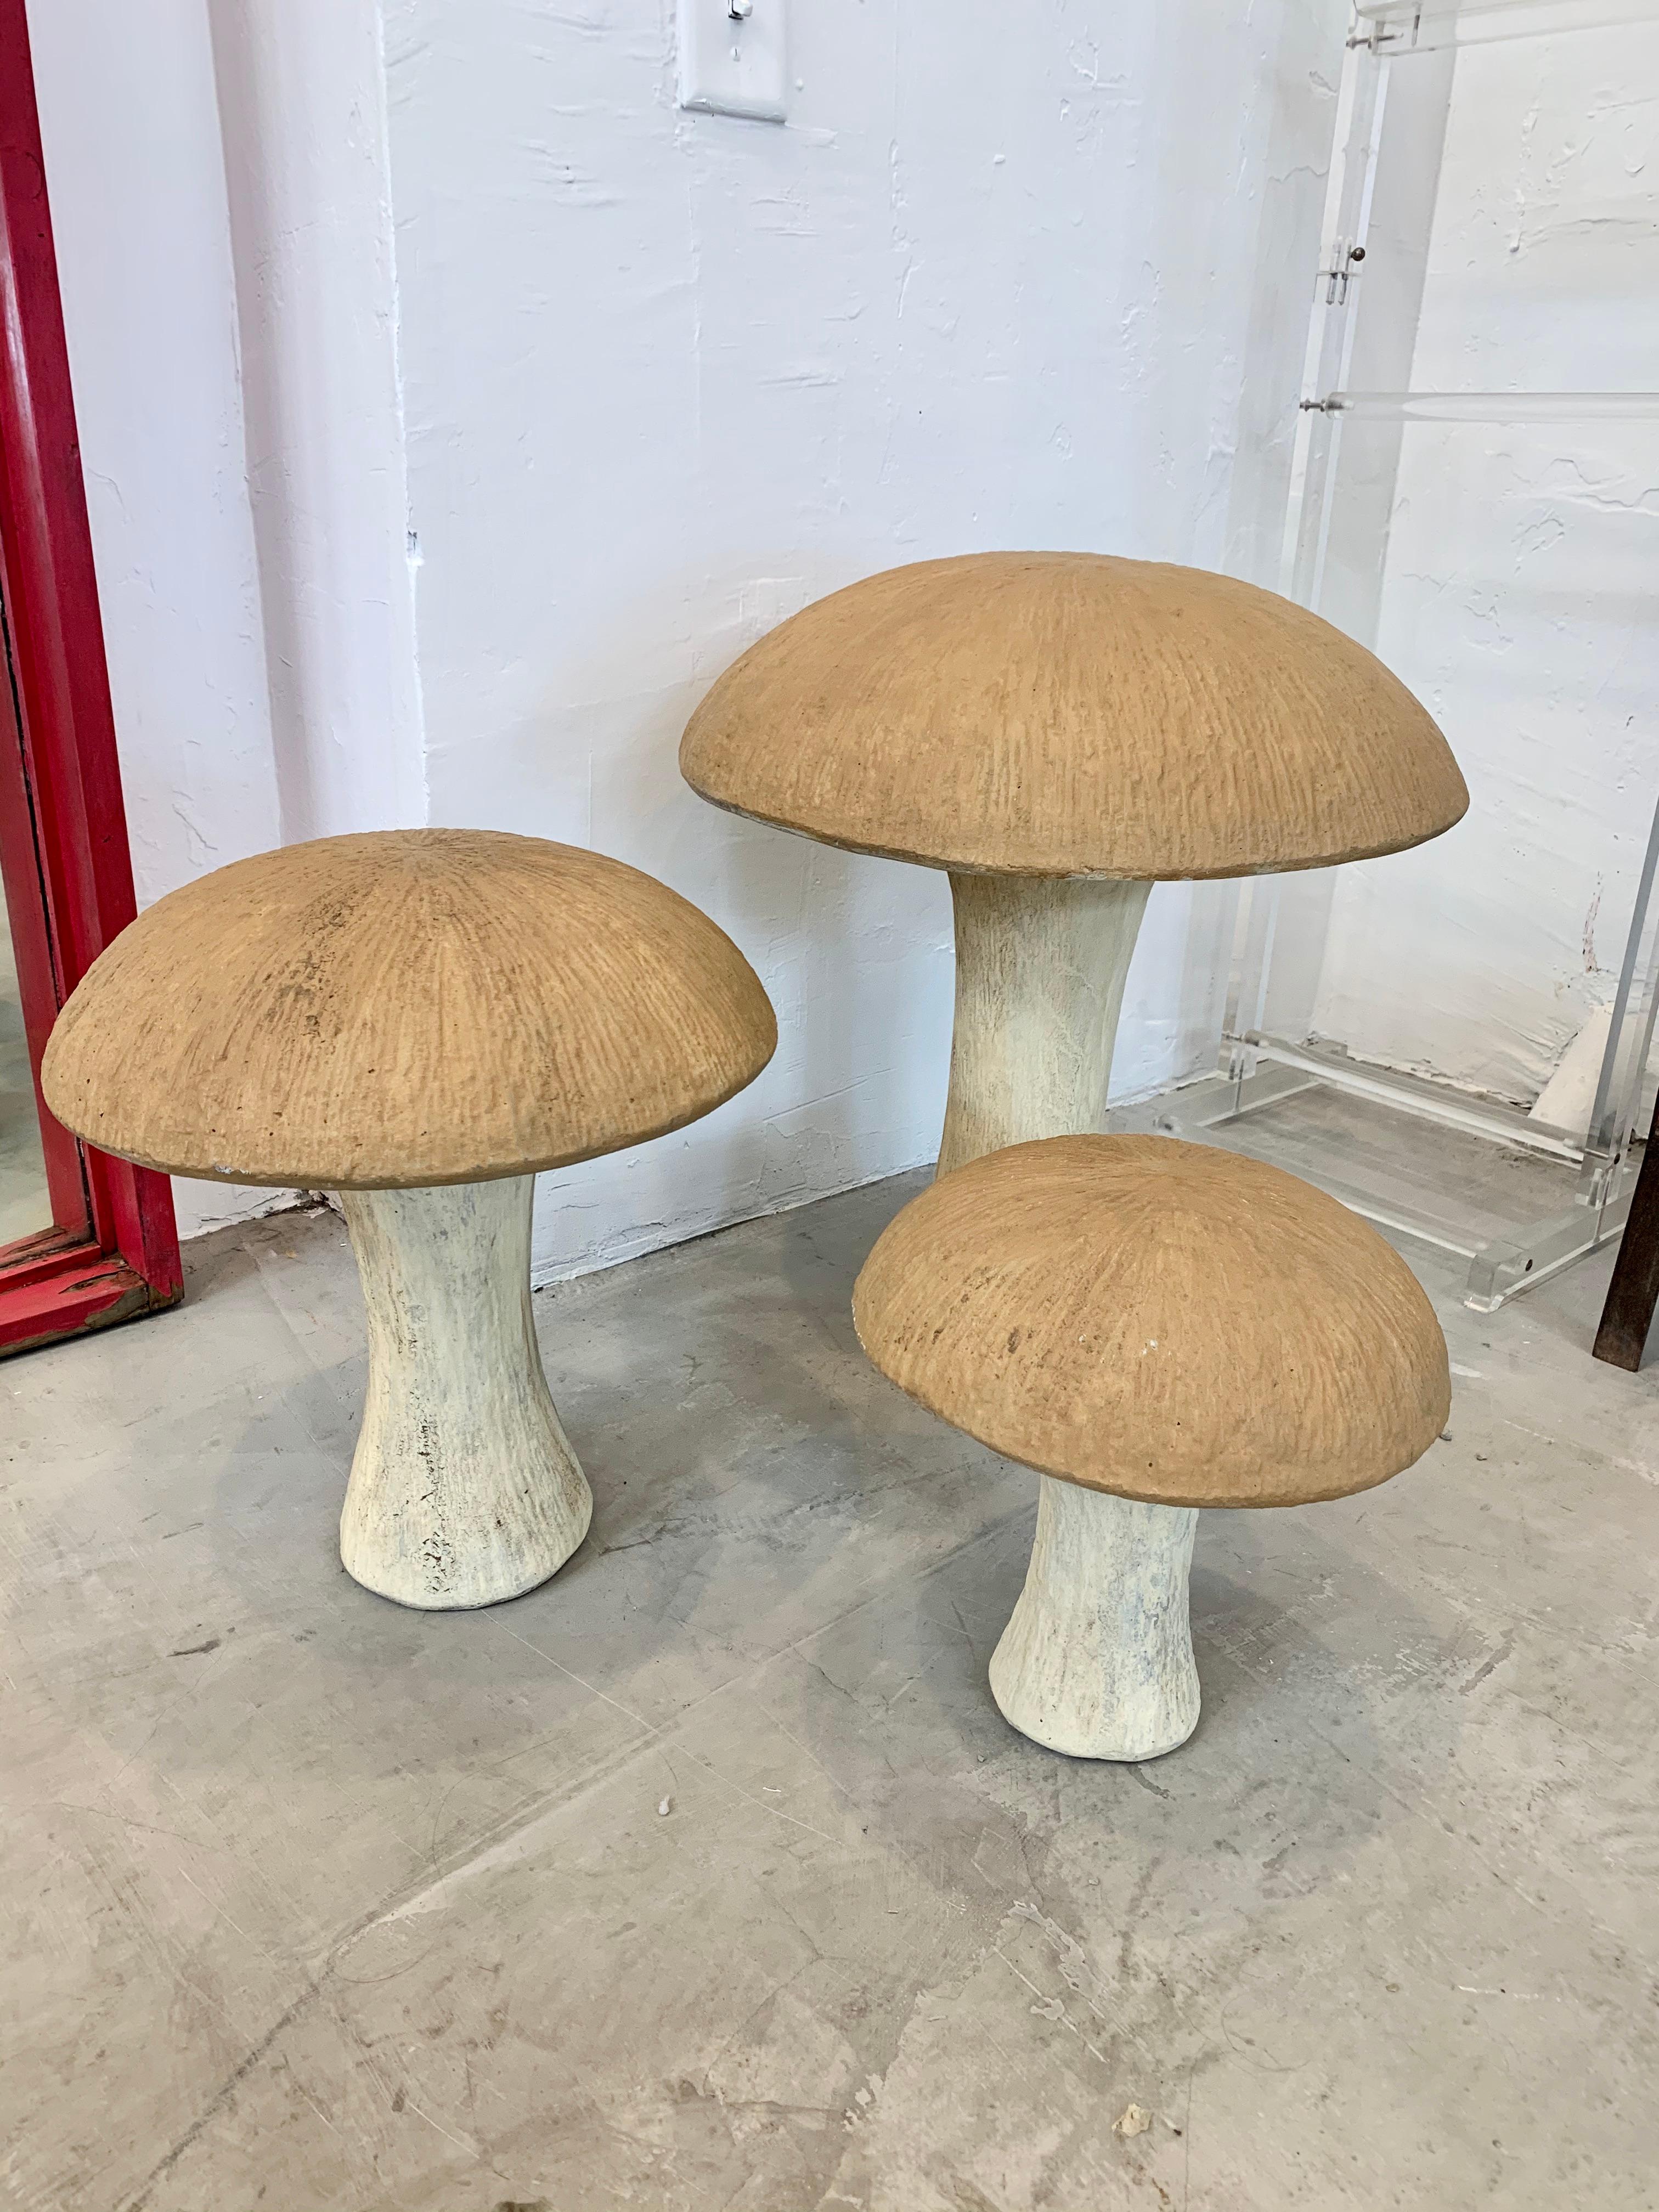 Set of 3 concrete mushroom sculptures from the 1970s. Large, medium and small. Light colored stalk with brown top. Can be used as a stool in the garden or placed inside or out as sculpture. Good vintage condition and coloring.

Sold as a set of 3